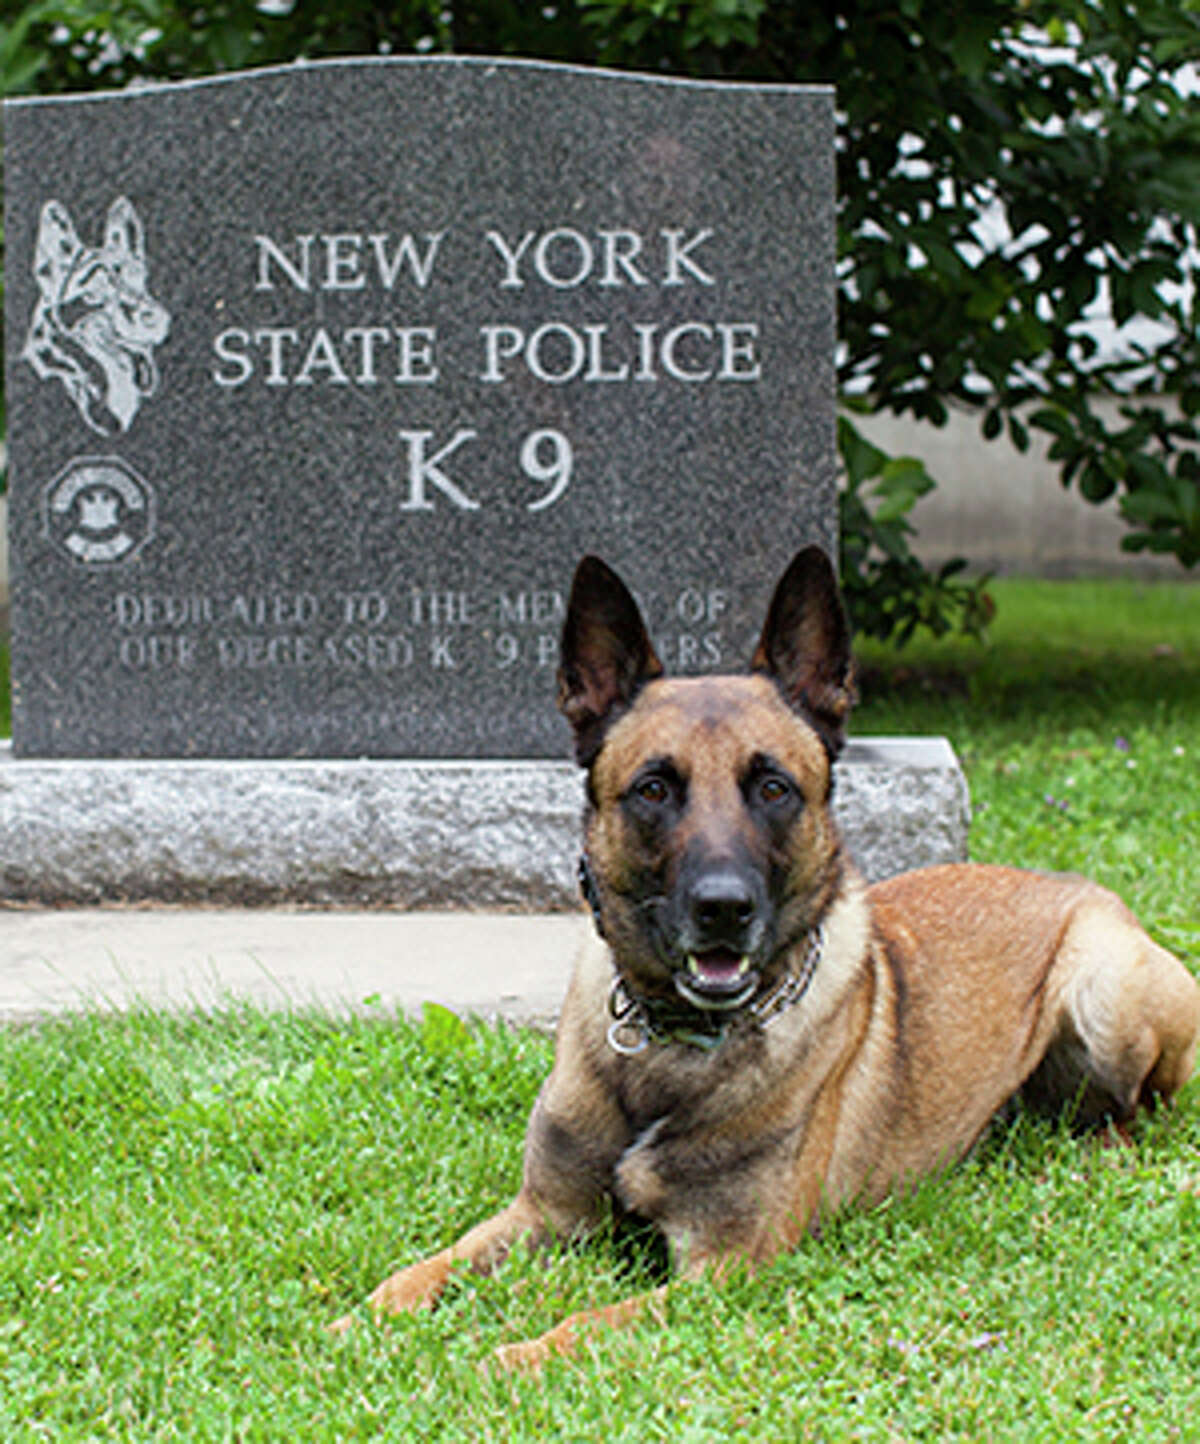 Brink is a male Malinois who specializes in sniffing out explosives. He is based at Division Headquarters in Albany with the Special Operations Response Team, and is handled by Technical Sgt. Jason Brewer. Brink is named after Trooper David C. Brinkerhoff. The 29-year-old was shot dead on April 25, 2007, while searching a Delaware County home where a burglar alarm was sounding. Troopers were already in the area looking for a man accused of shooting Trooper Matthew J. Gombosi earlier that day, and Brinkerhoff came upon him inside the home. The suspect fatally wounded Brinkerhoff and also shot Trooper Richard G. Mattson in an exchange of gunfire. Brinkerhoff spent nearly 10 years with the State Police and was assigned to the Coxsackie barracks when he died.